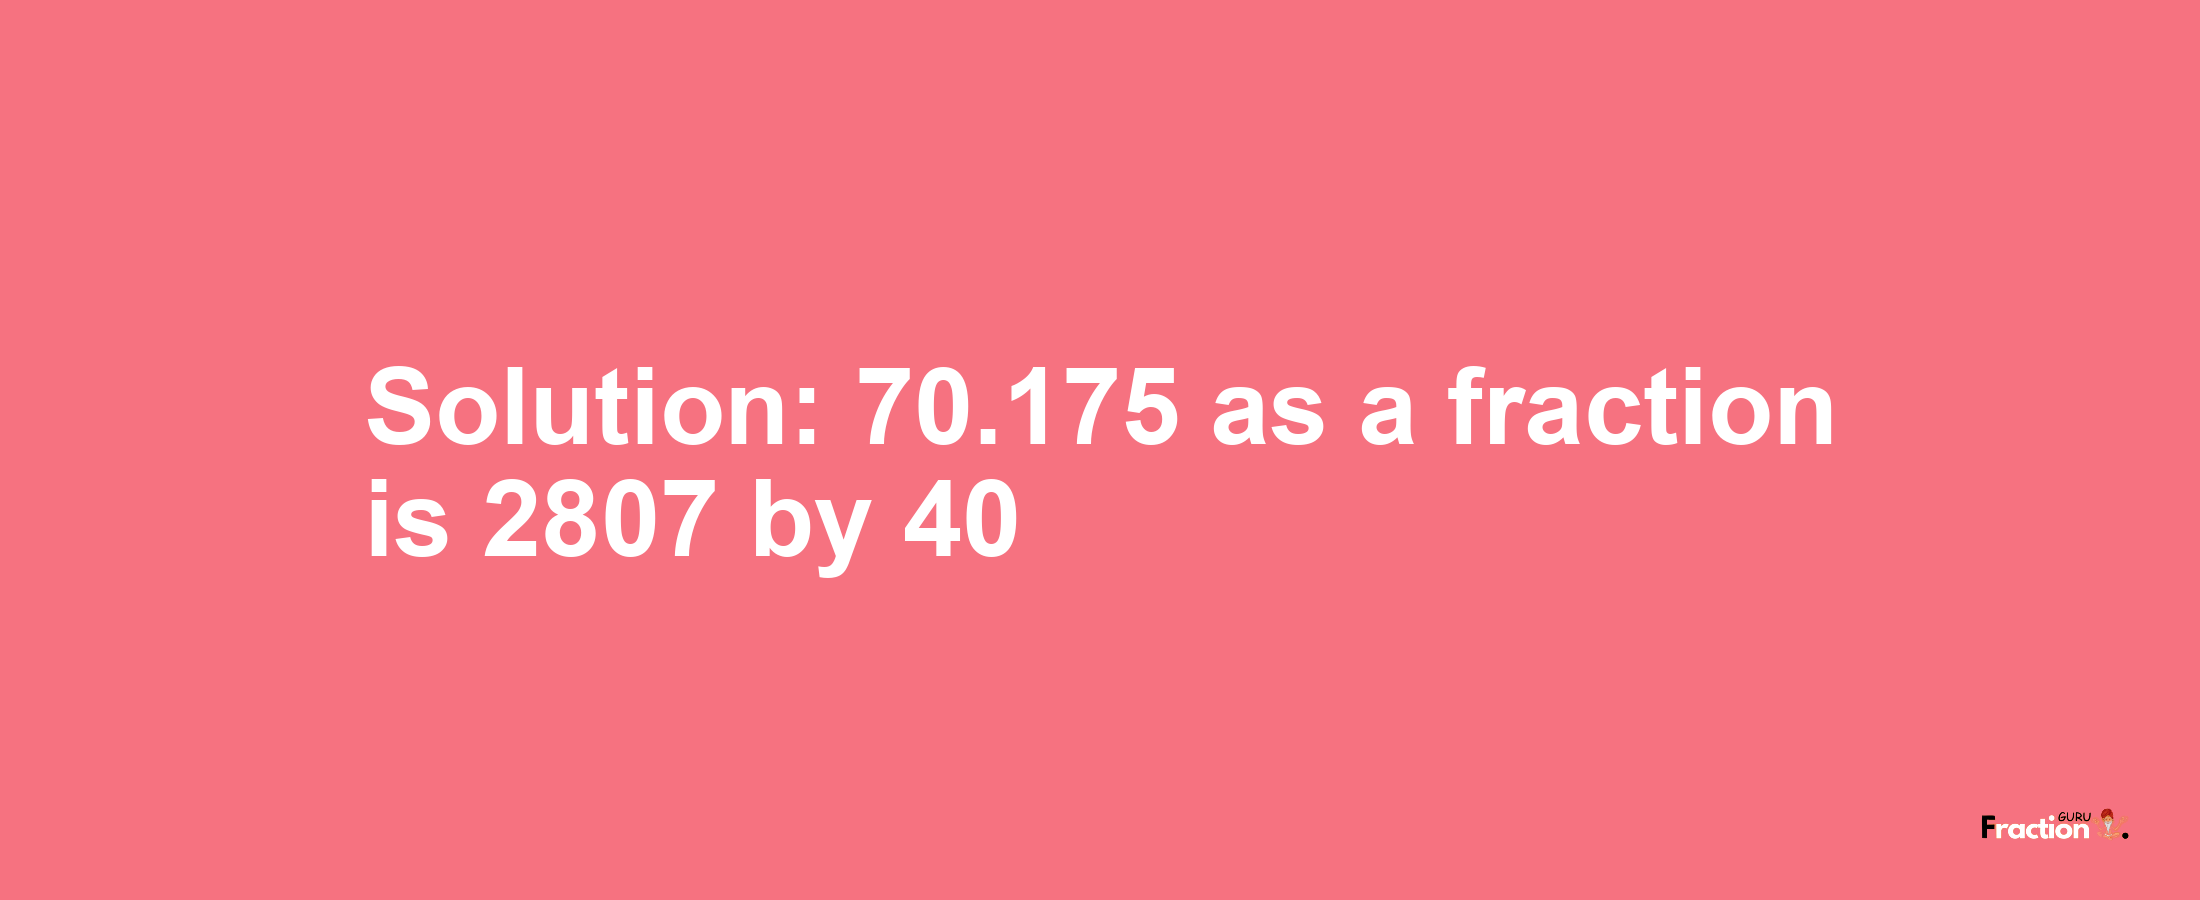 Solution:70.175 as a fraction is 2807/40